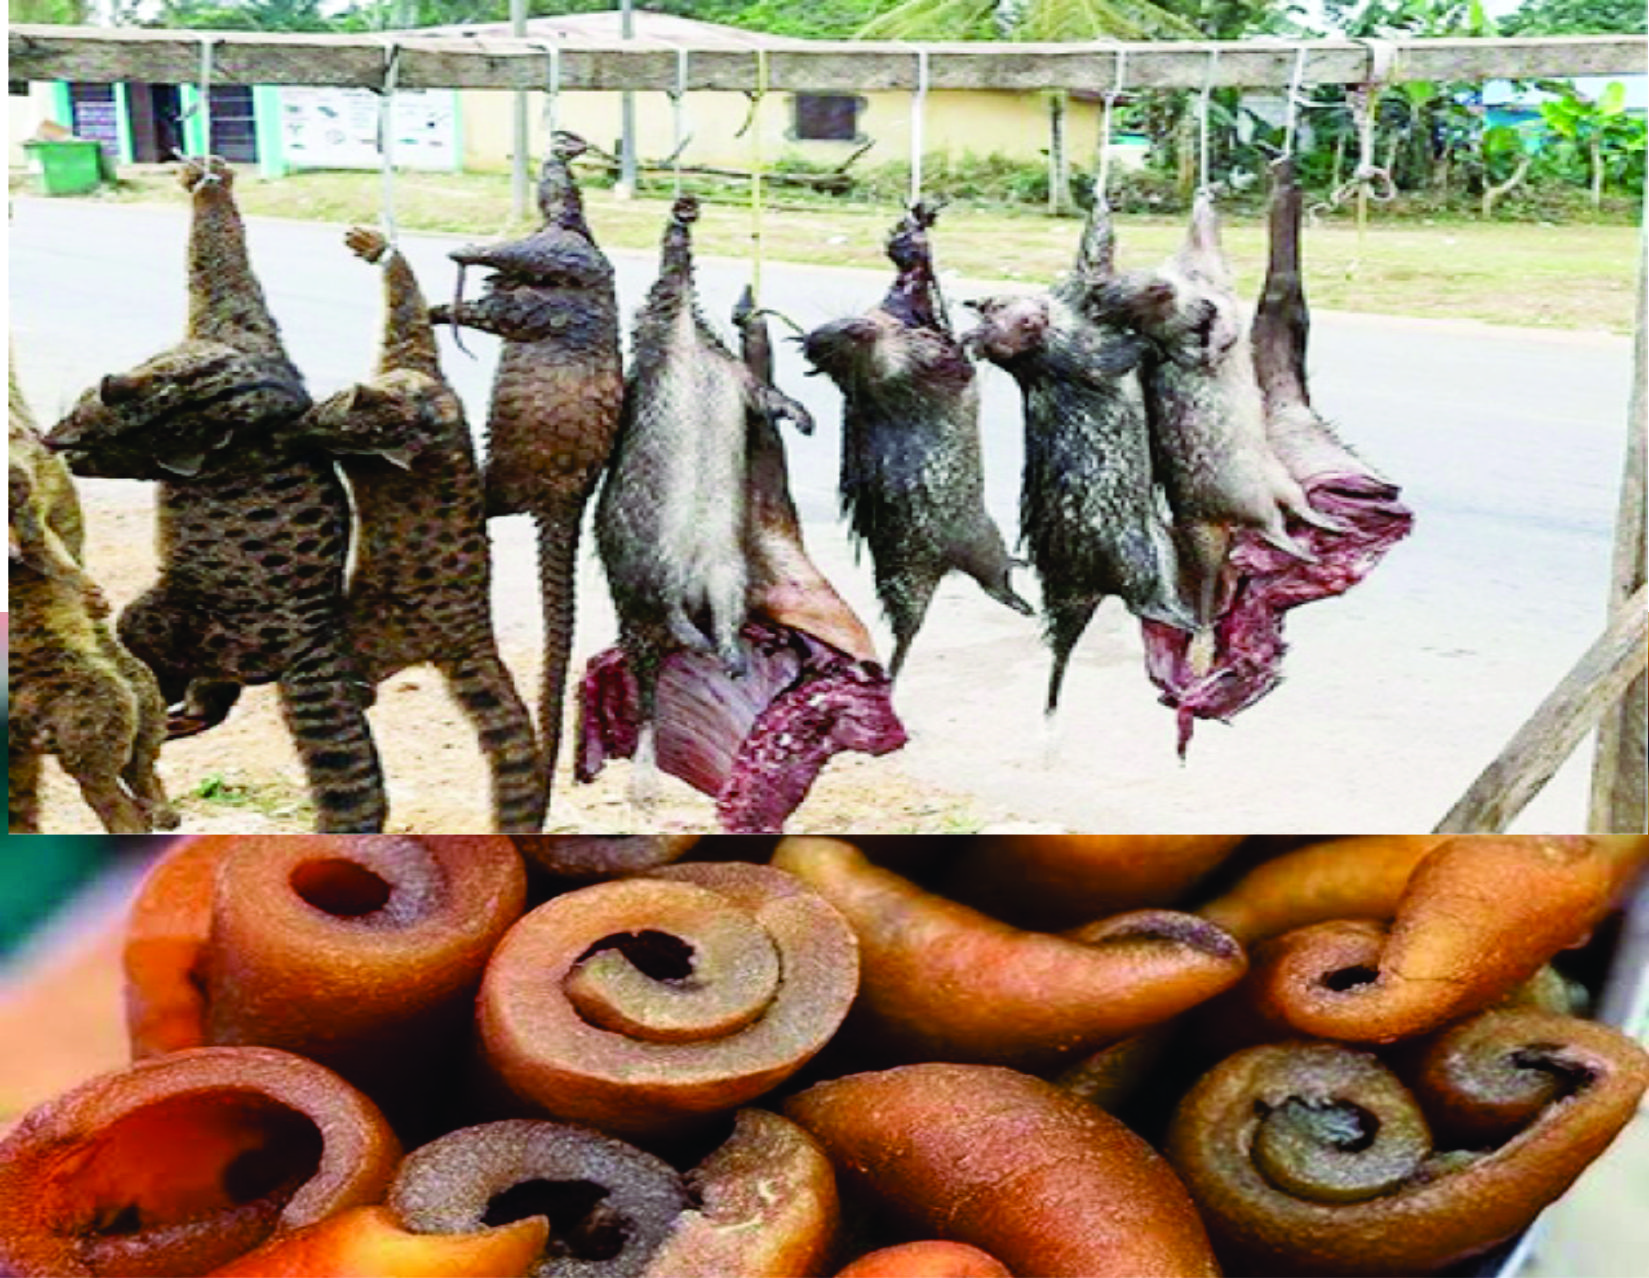 Bush Meat and Ponmo (hides)